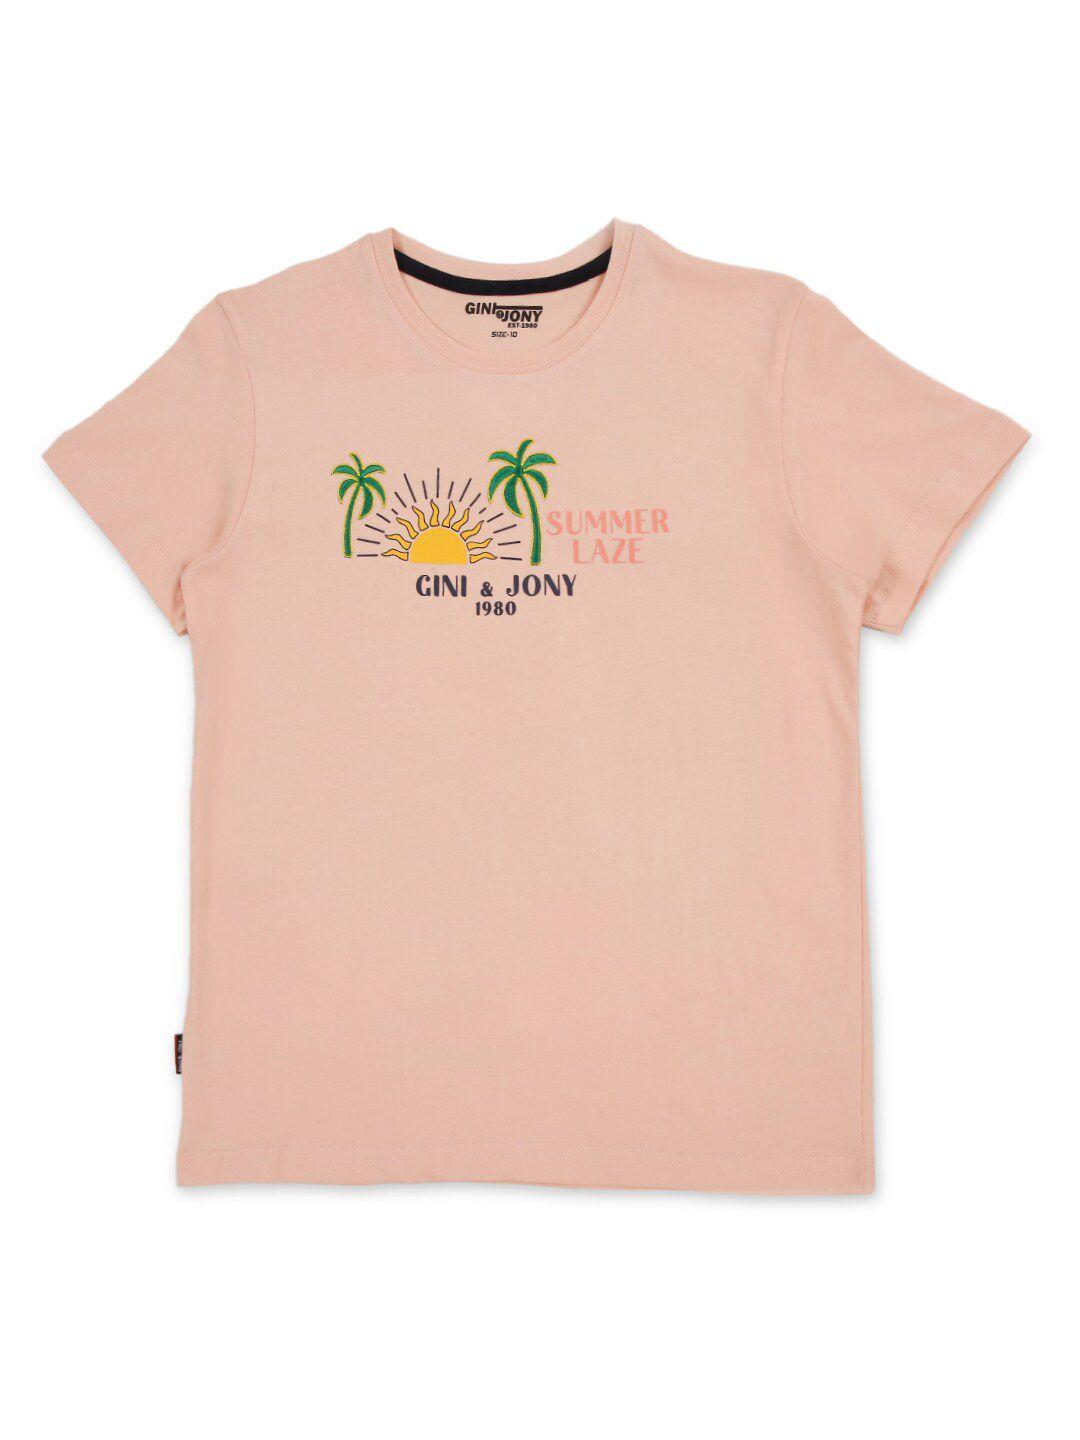 gini and jony boys embroidered graphic printed cotton t-shirt